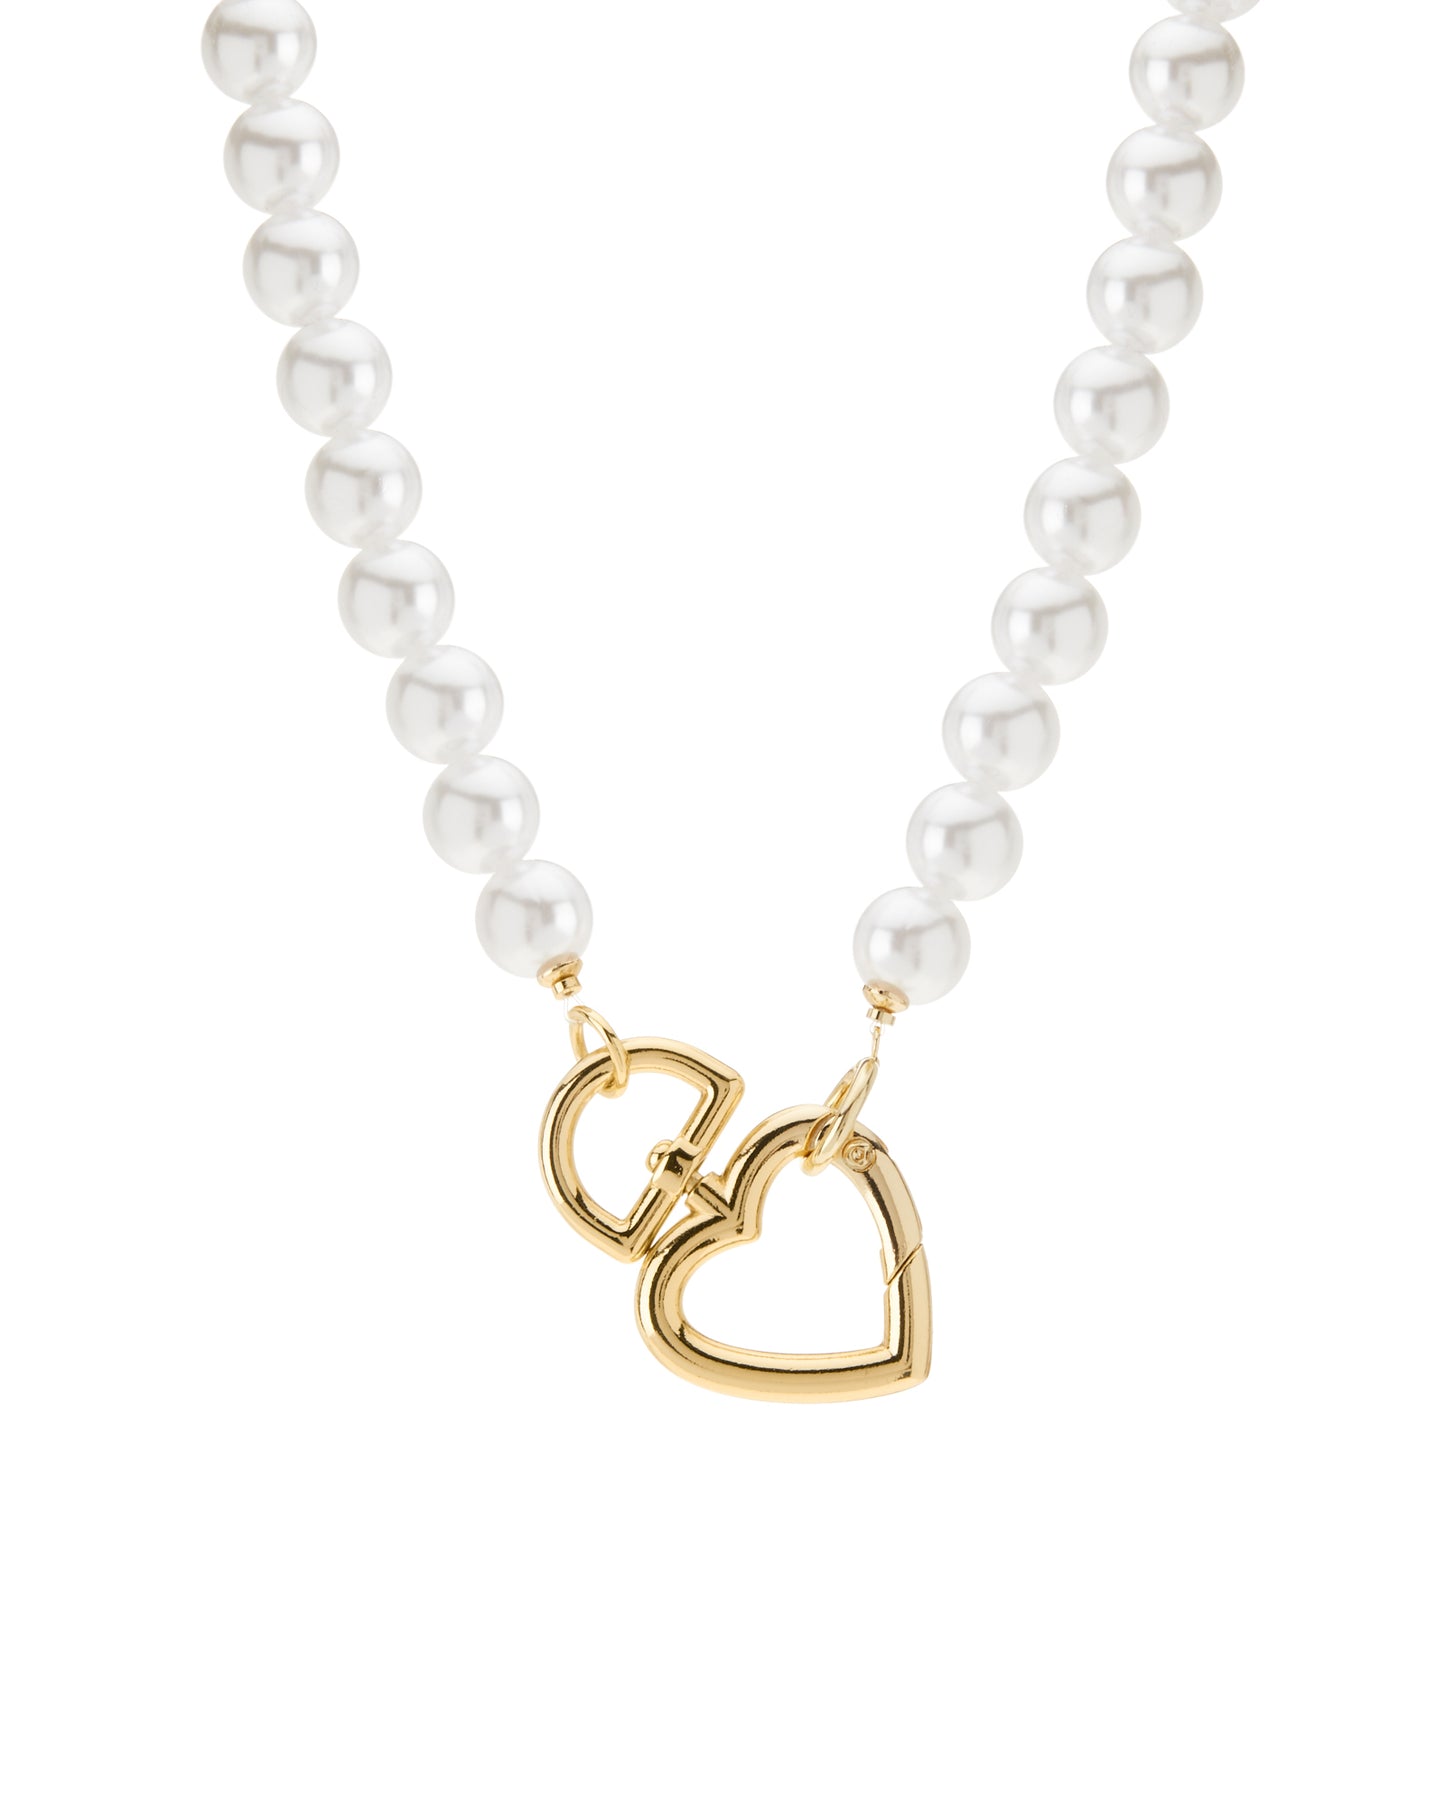 Aortic Affair Necklace